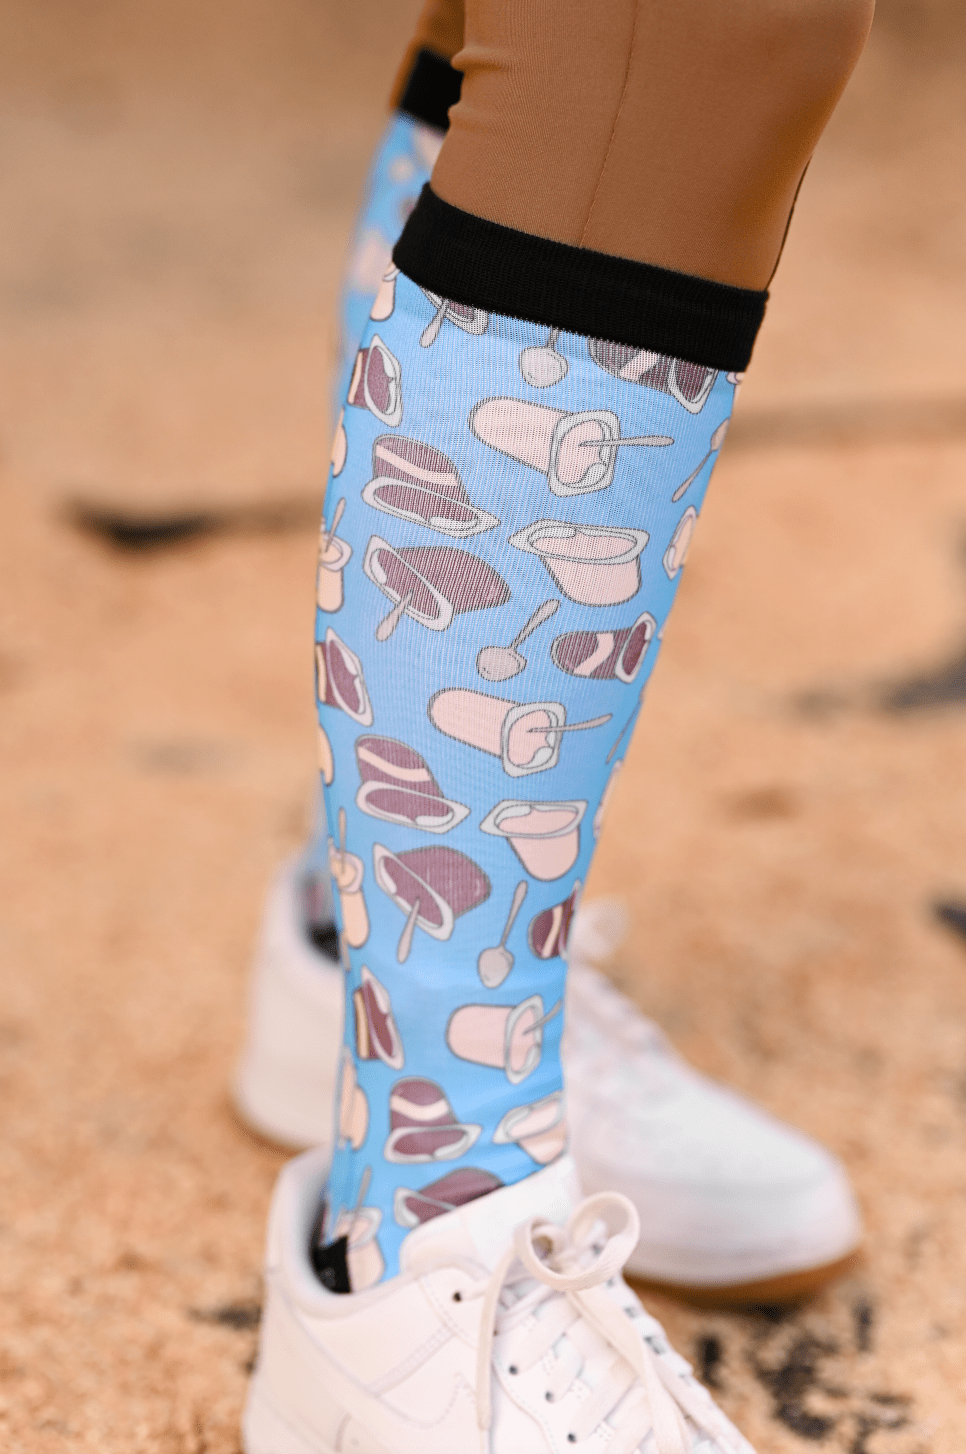 dreamers & schemers Pair & A Spare Pudding Cup Pair & a Spare equestrian boot socks boot socks thin socks riding socks pattern socks tall socks funny socks knee high socks horse socks horse show socks